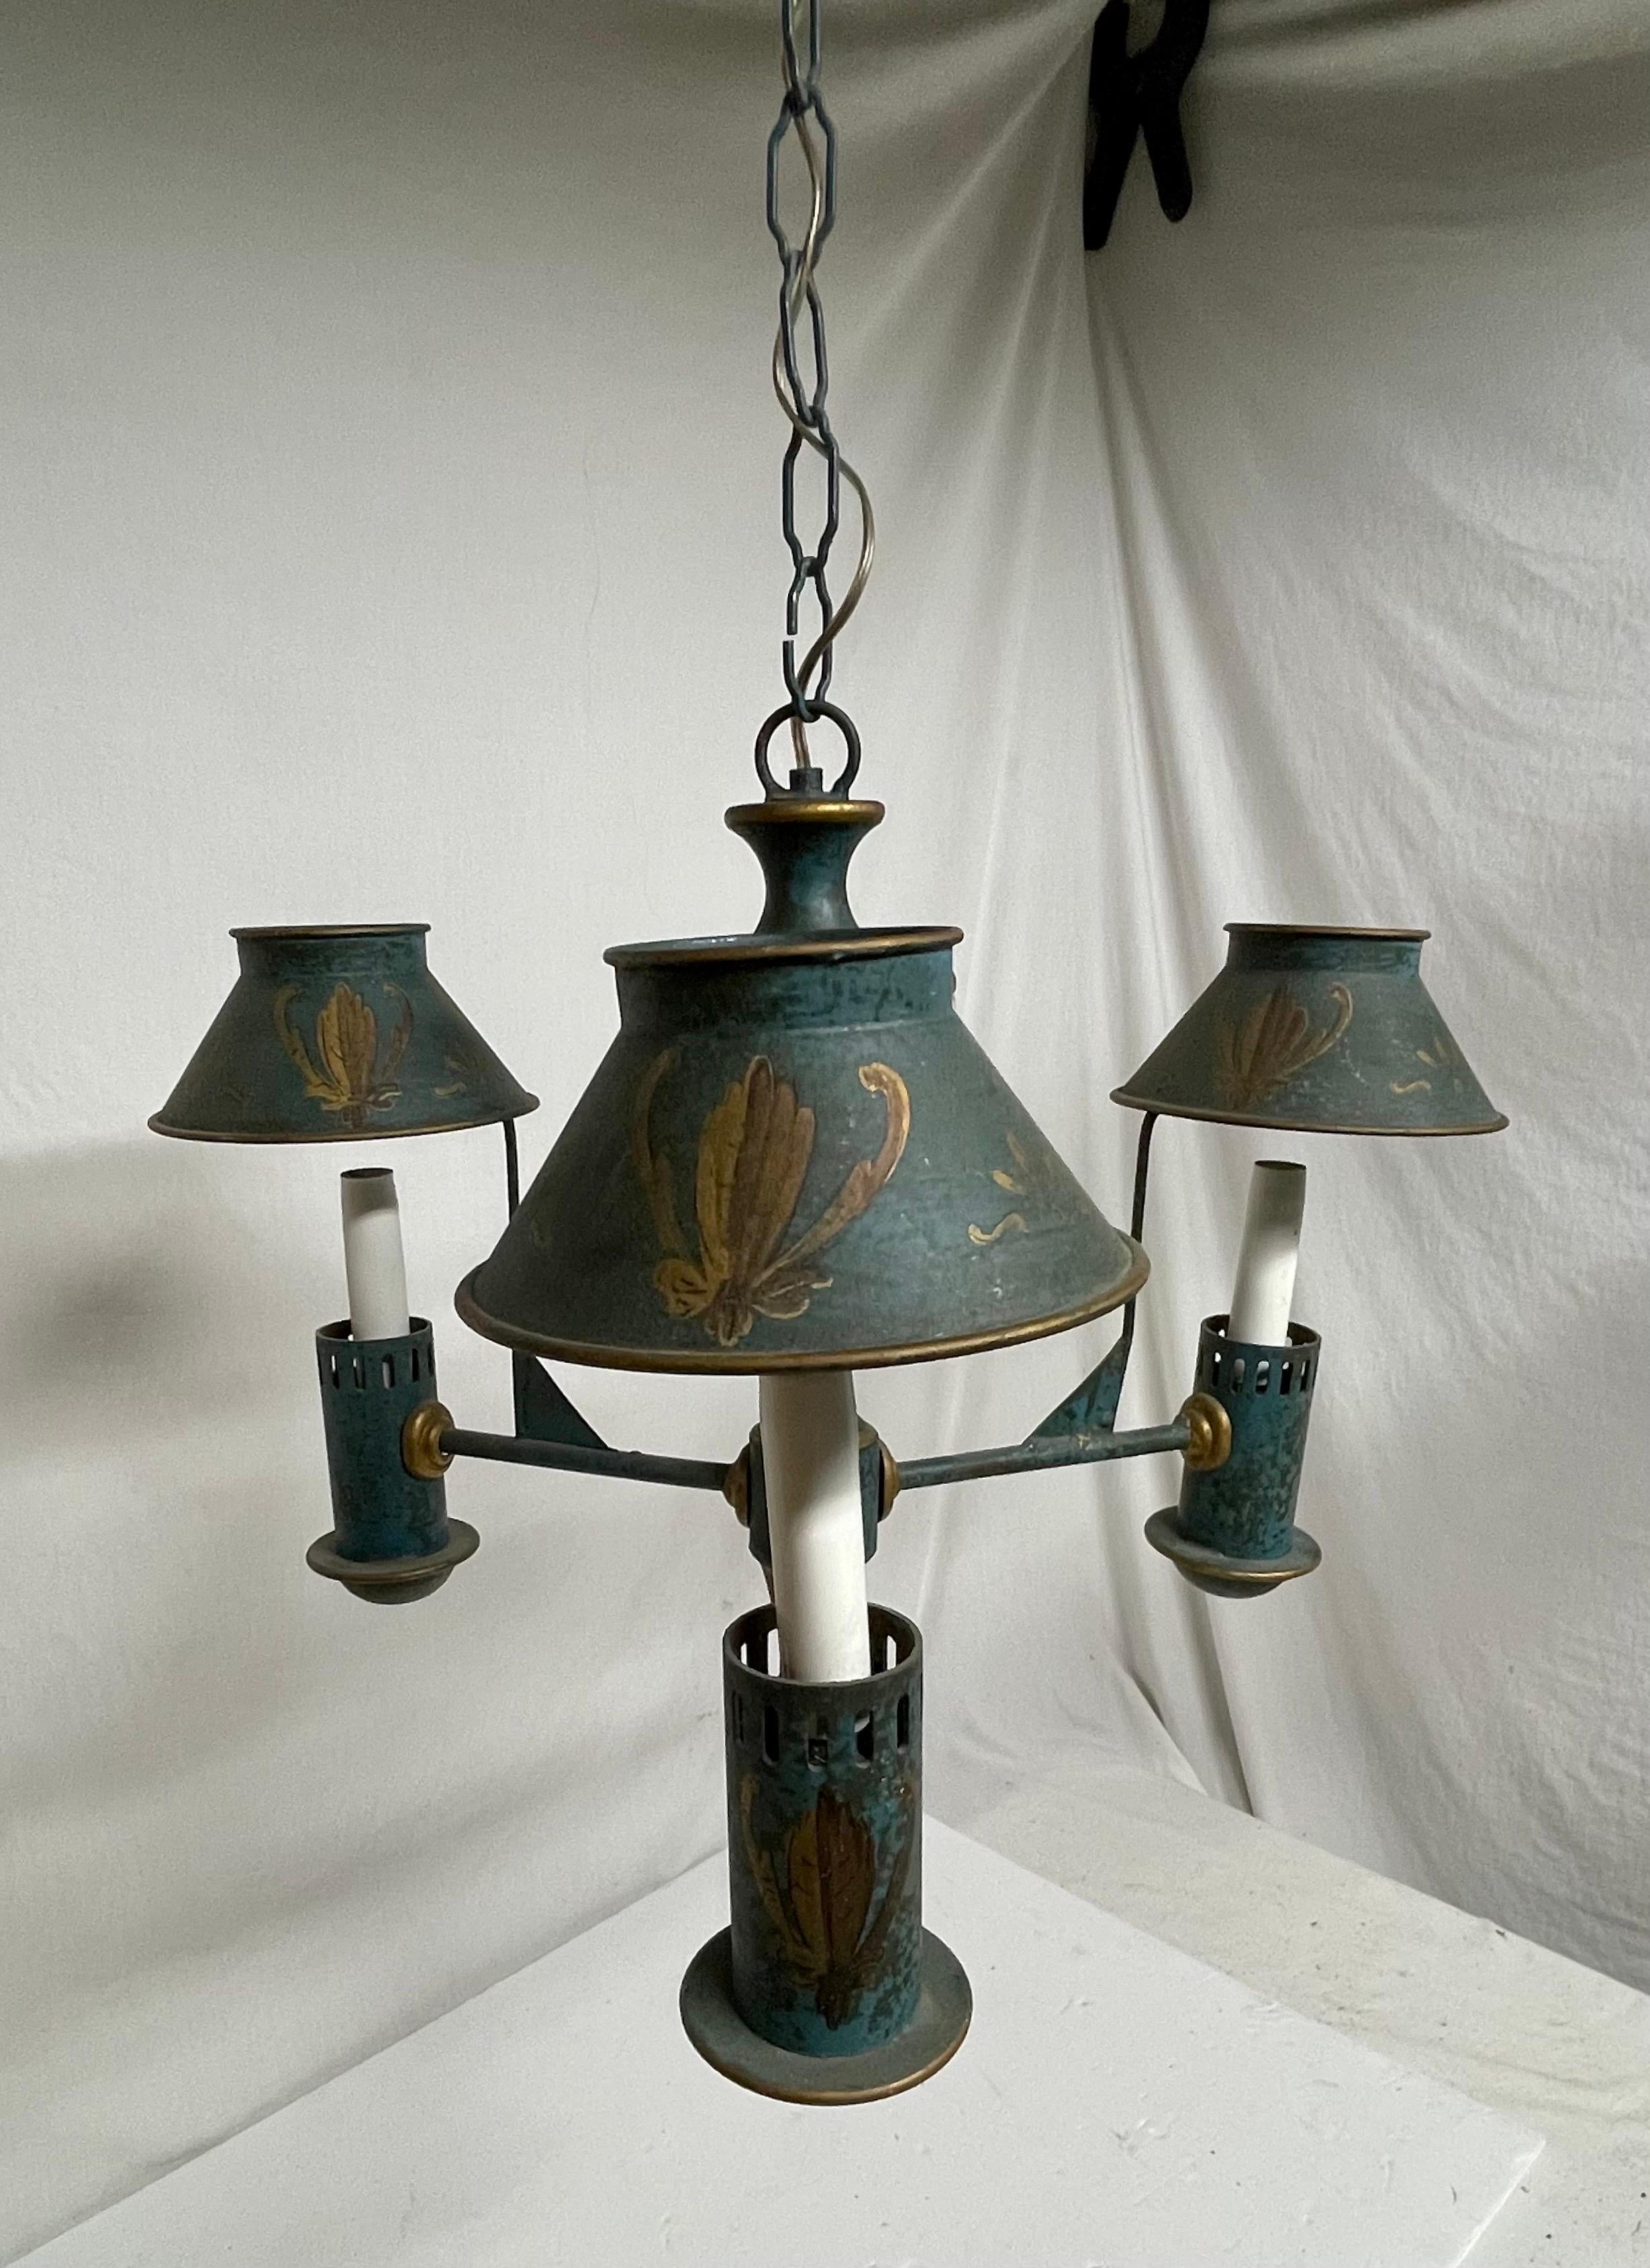 Tole painted three light chandelier. Hand painted metal frame with three metal attached shades. 35